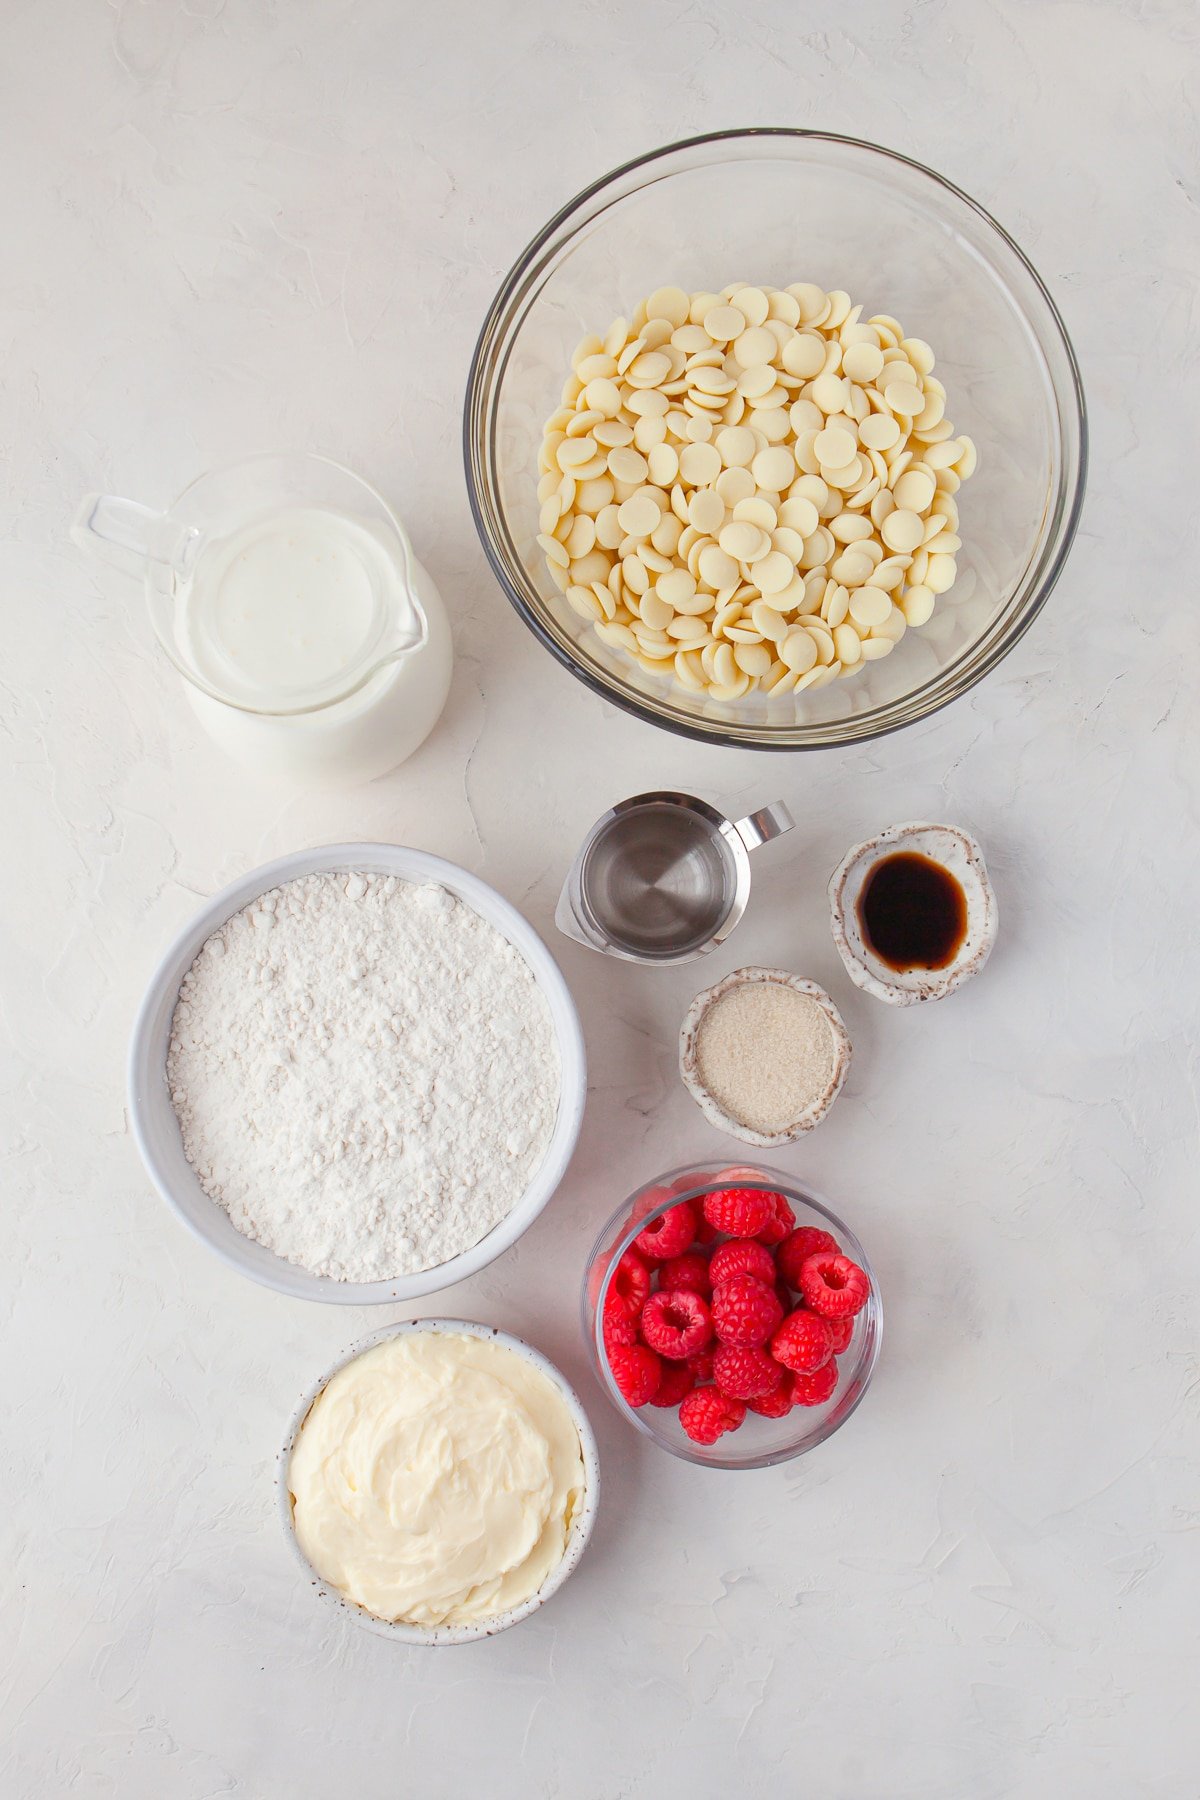 Overhead image of ingredients needed to make Raspberry Tart on a white stucco counter top